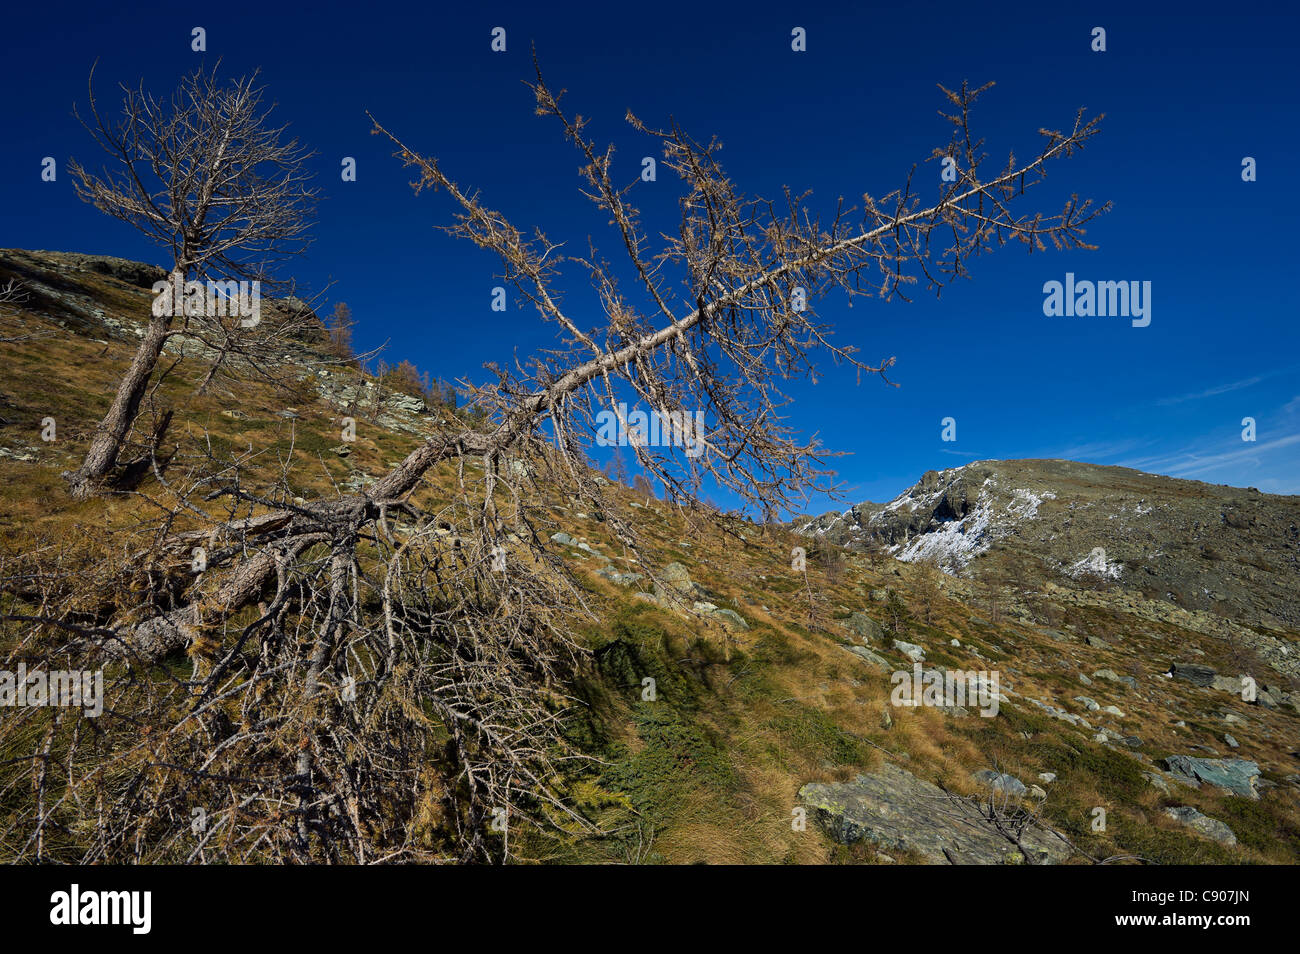 Italy, Aosta valley, mountain landscape with larches Stock Photo